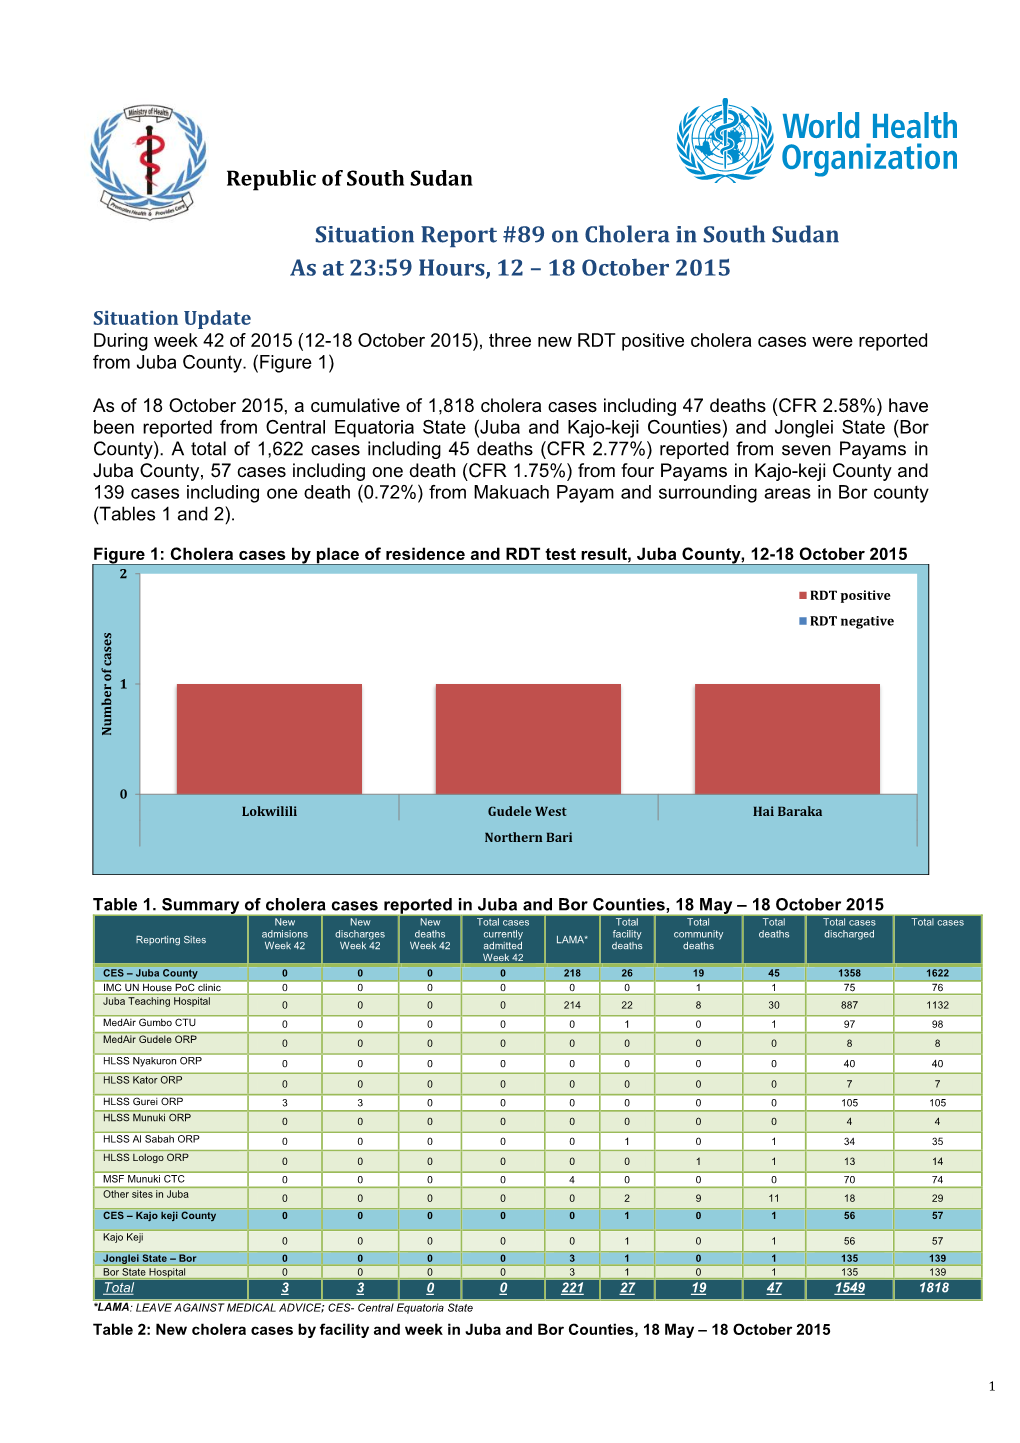 Situation Report #89 on Cholera in South Sudan As at 23:59 Hours, 12 – 18 October 2015